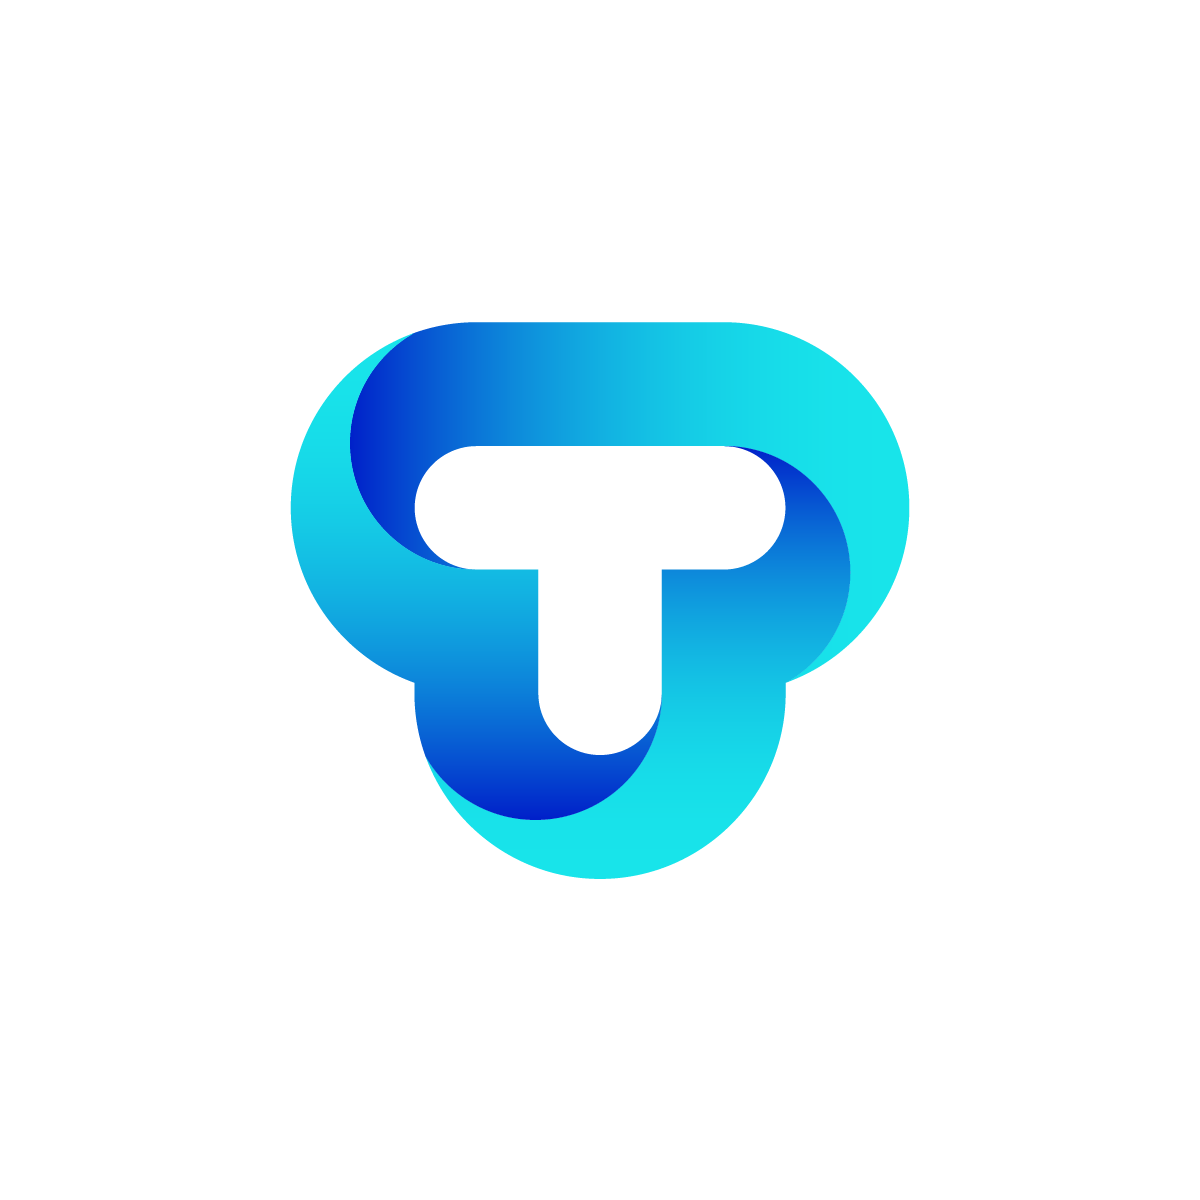 Eye-catching logo with letter 'T' composed of circles and gradients, conveying depth, dynamic flow, and a sense of transition.